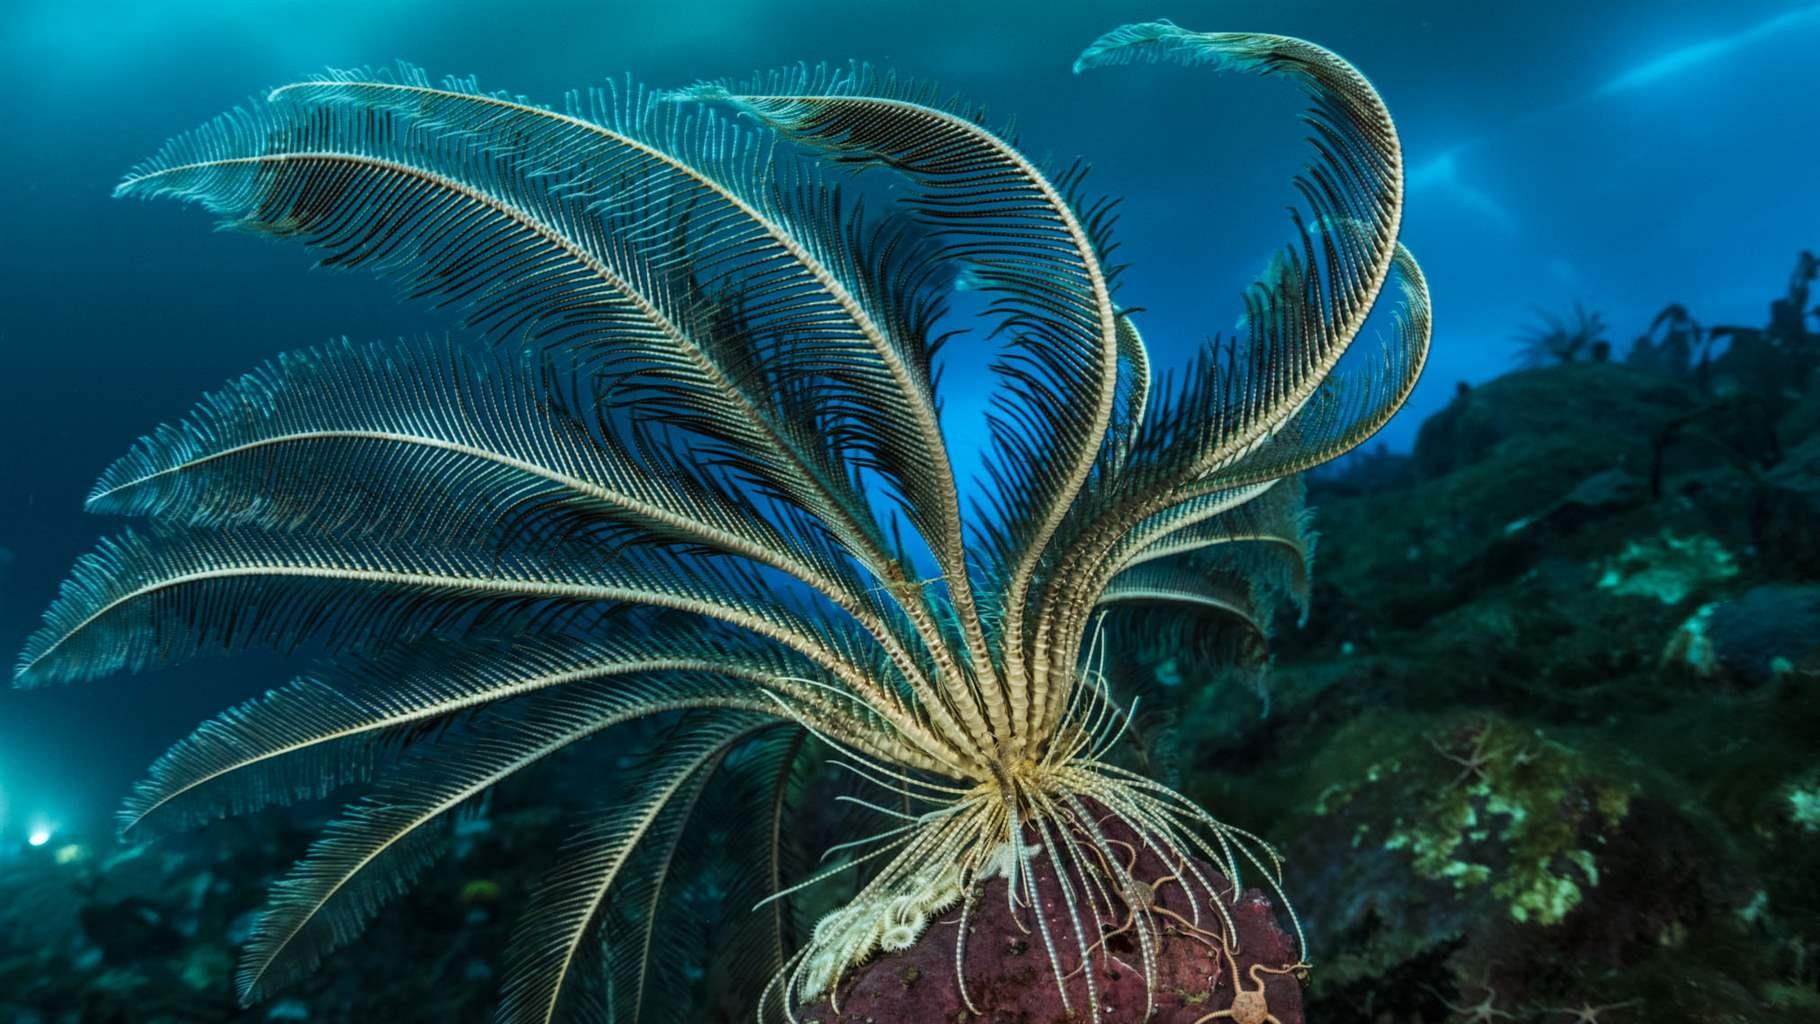 giant feather star